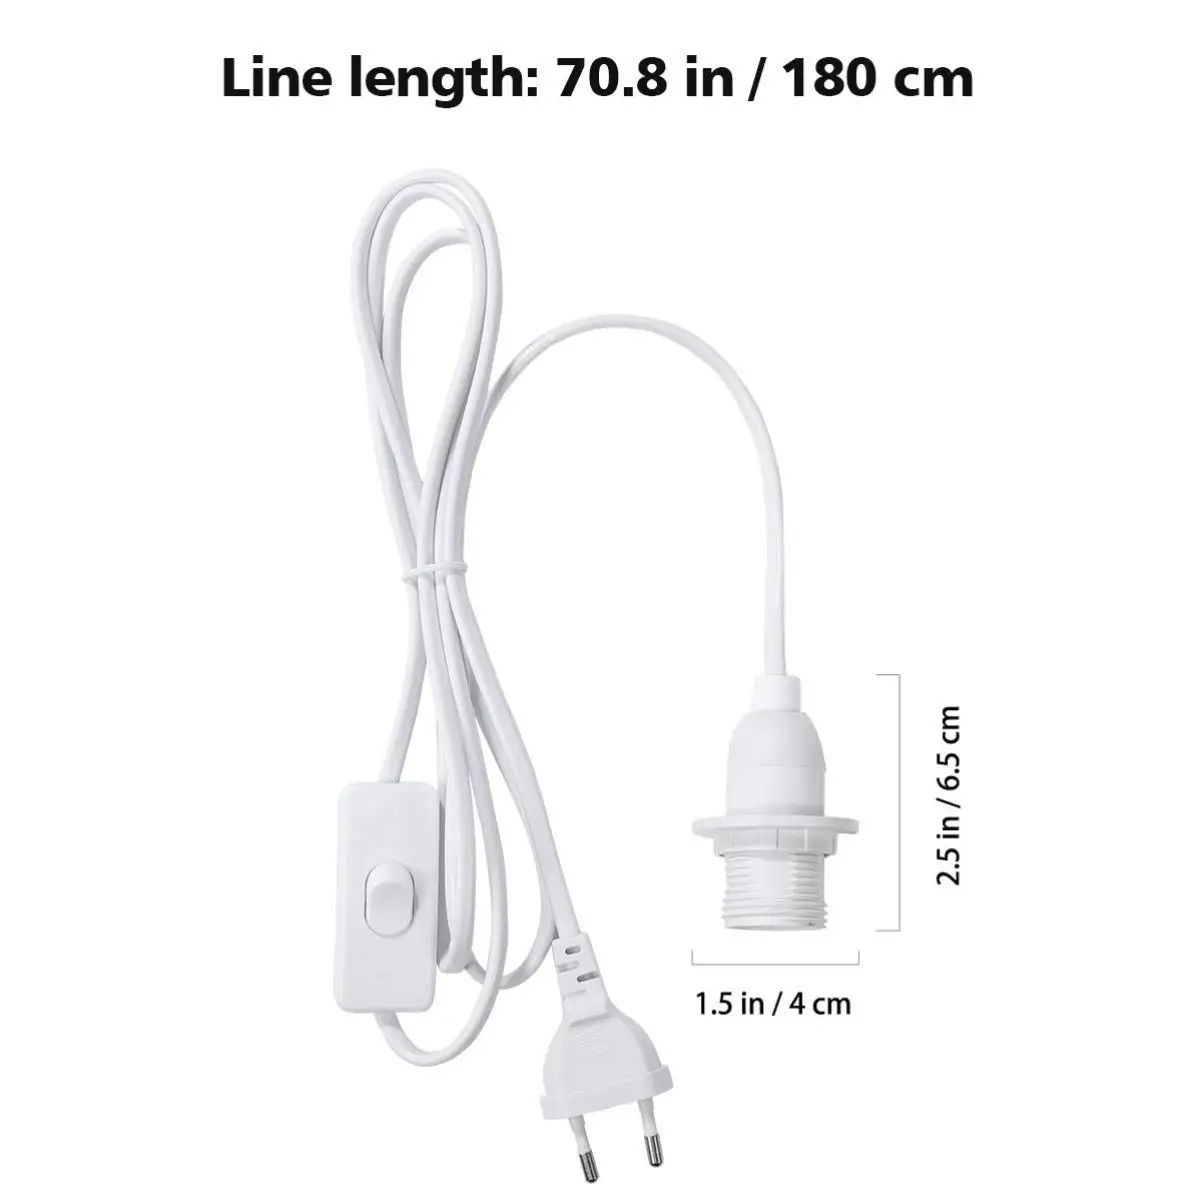 Color: 1.8m wire no teeth; Base Type: E14 Lamp Bases Lamp Bases E27 Full Teeth Switch-Wire EU US plug for LED Bulb Hanglamp Suspension Socket Holder 1.8M Power Cord Cable 